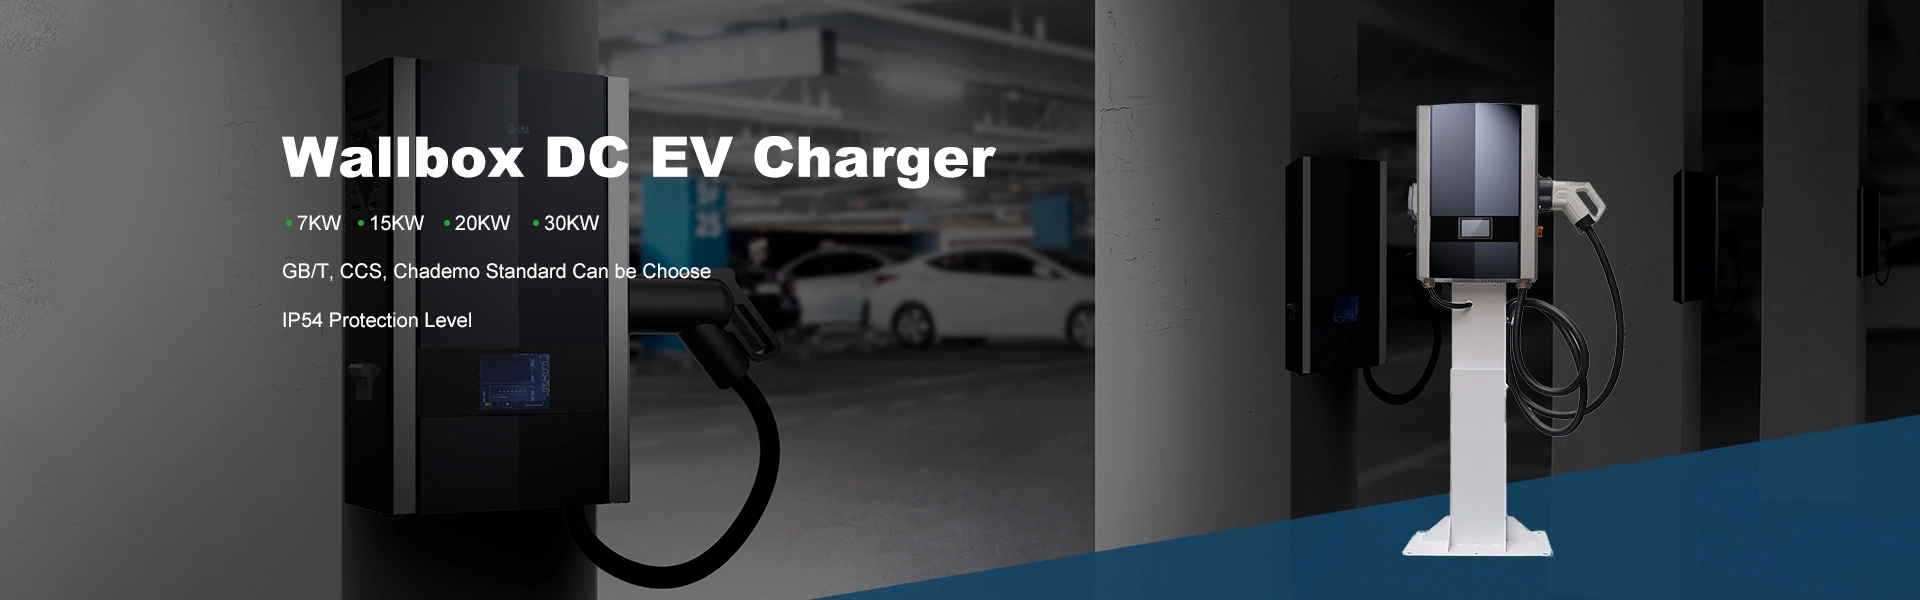 Max Power Energizes Your Drive with Customized EV Chargers